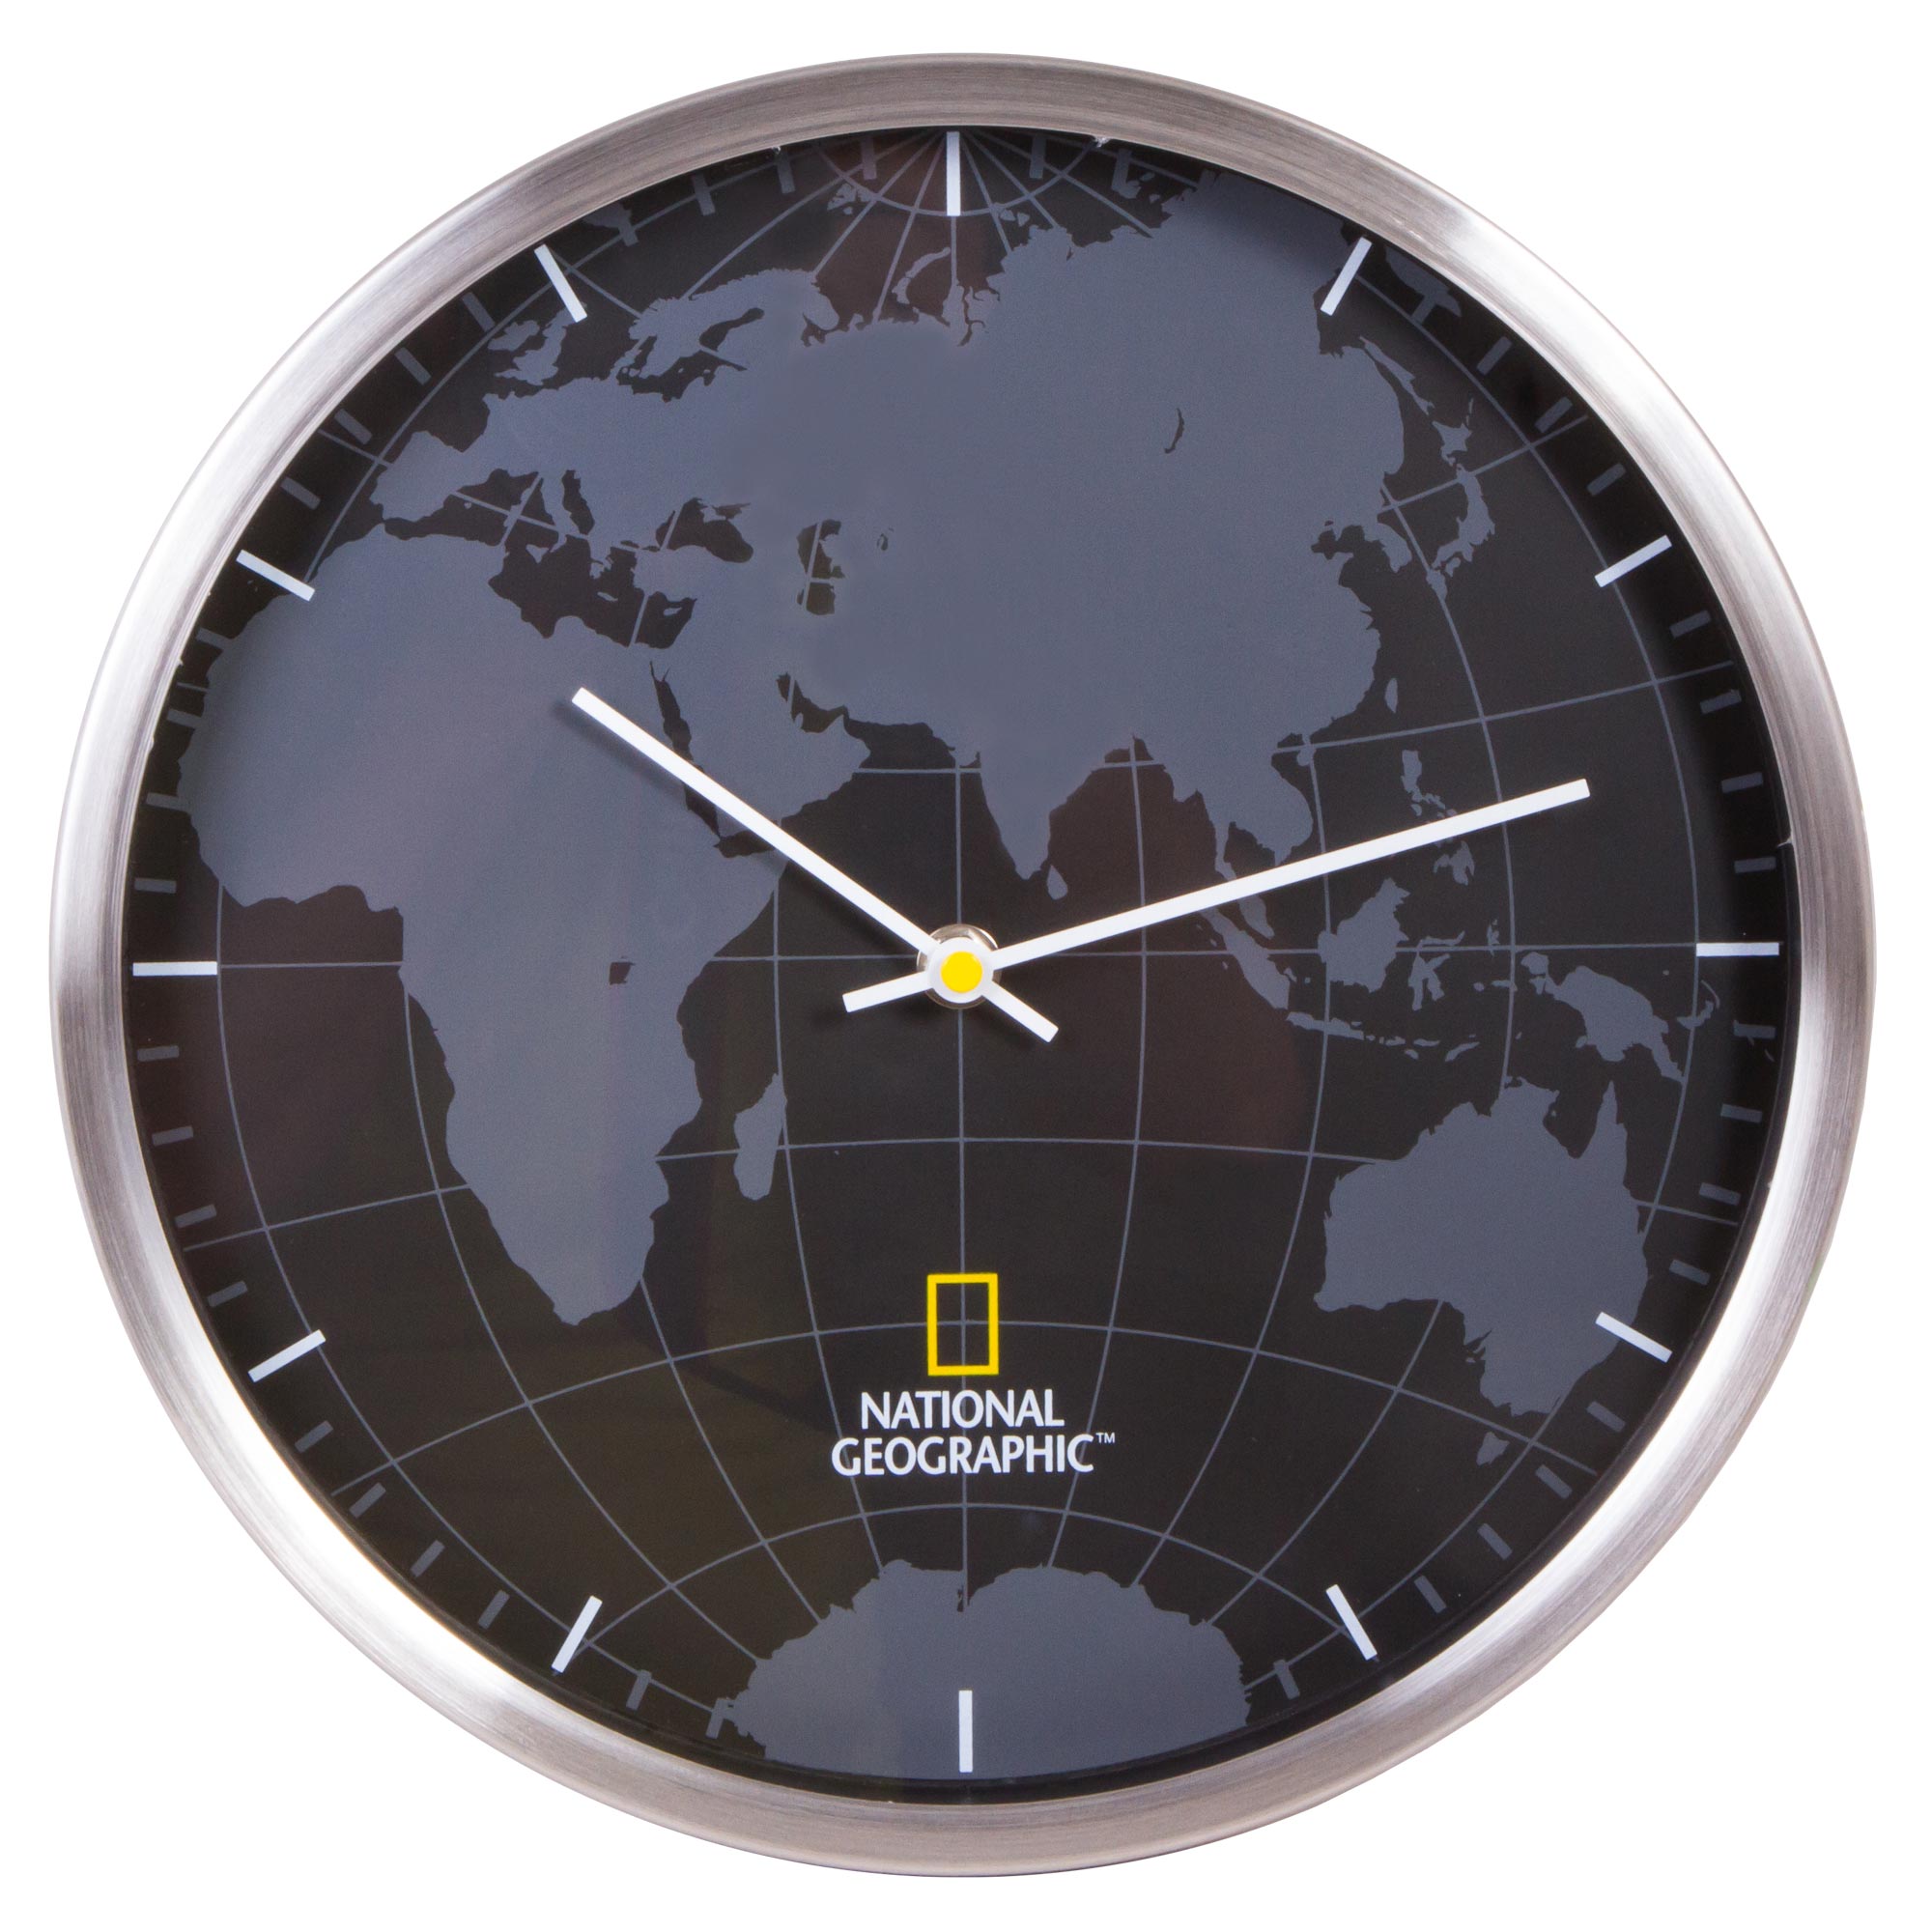 Bresser%20National%20Geographic%20Wall%20Clock%2030cm